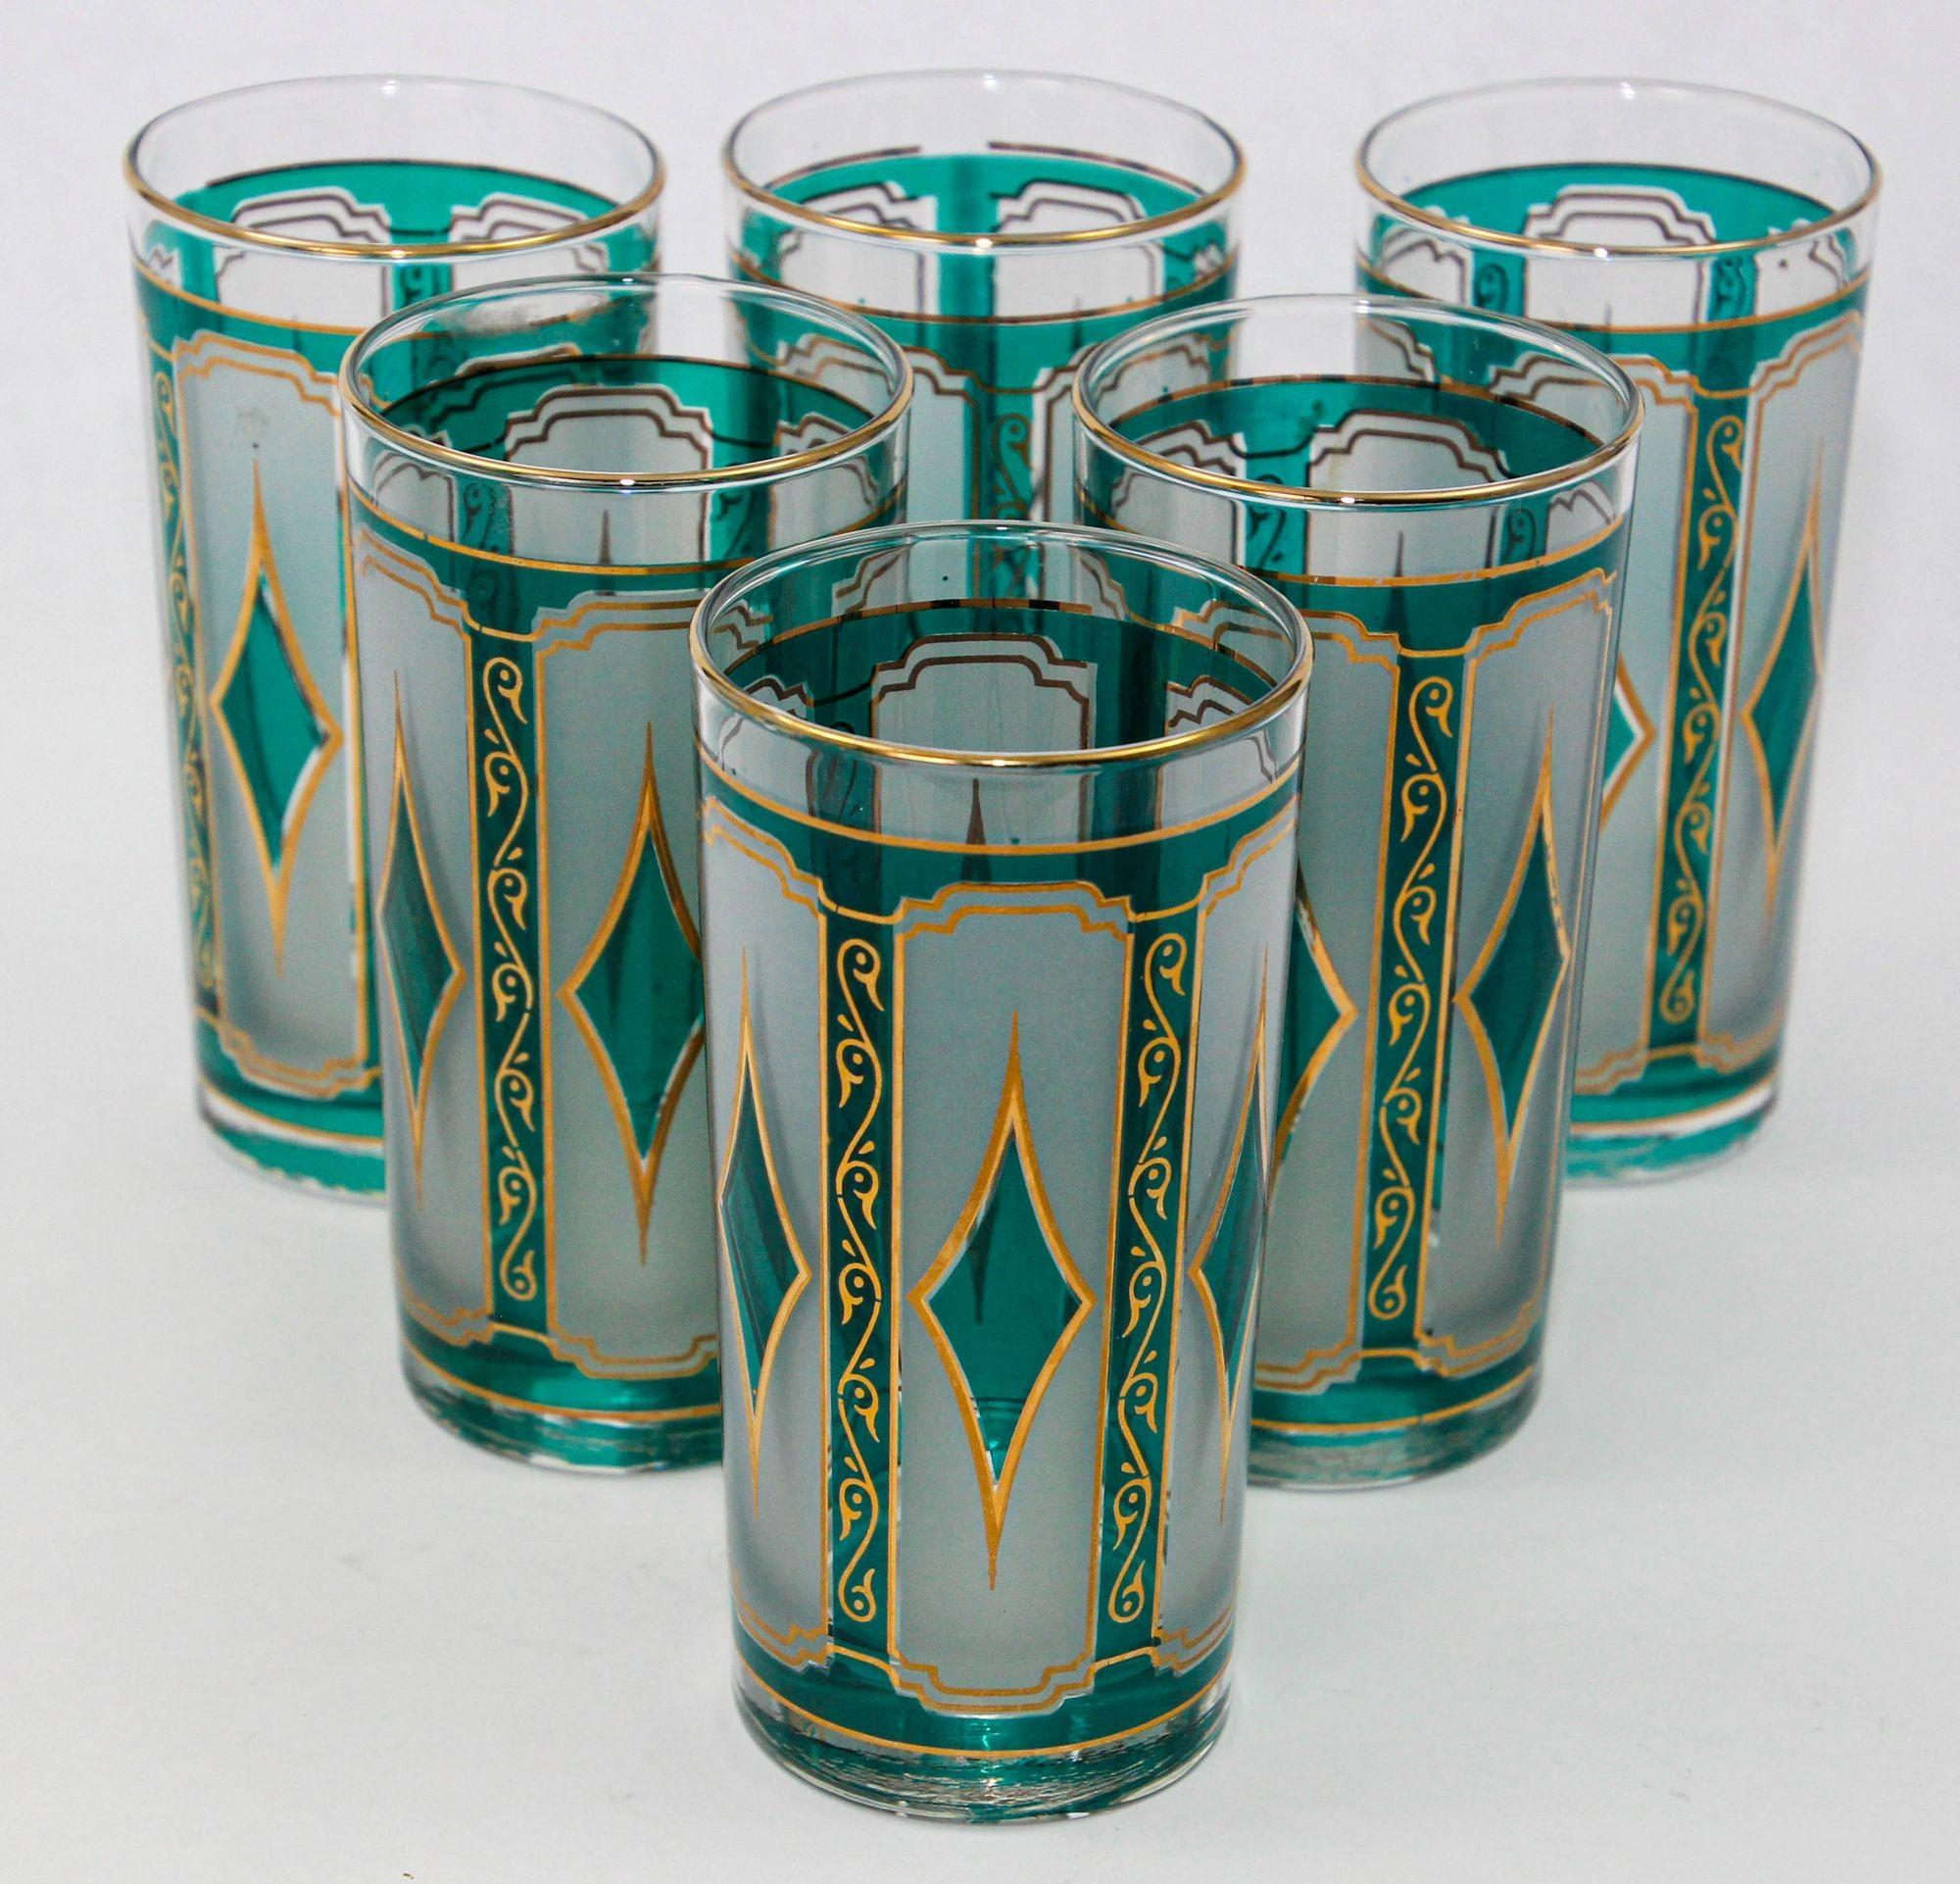 American Libbey Emerald Green with 22K Gold Diamond Glasses set of 6 Hollywood Regency